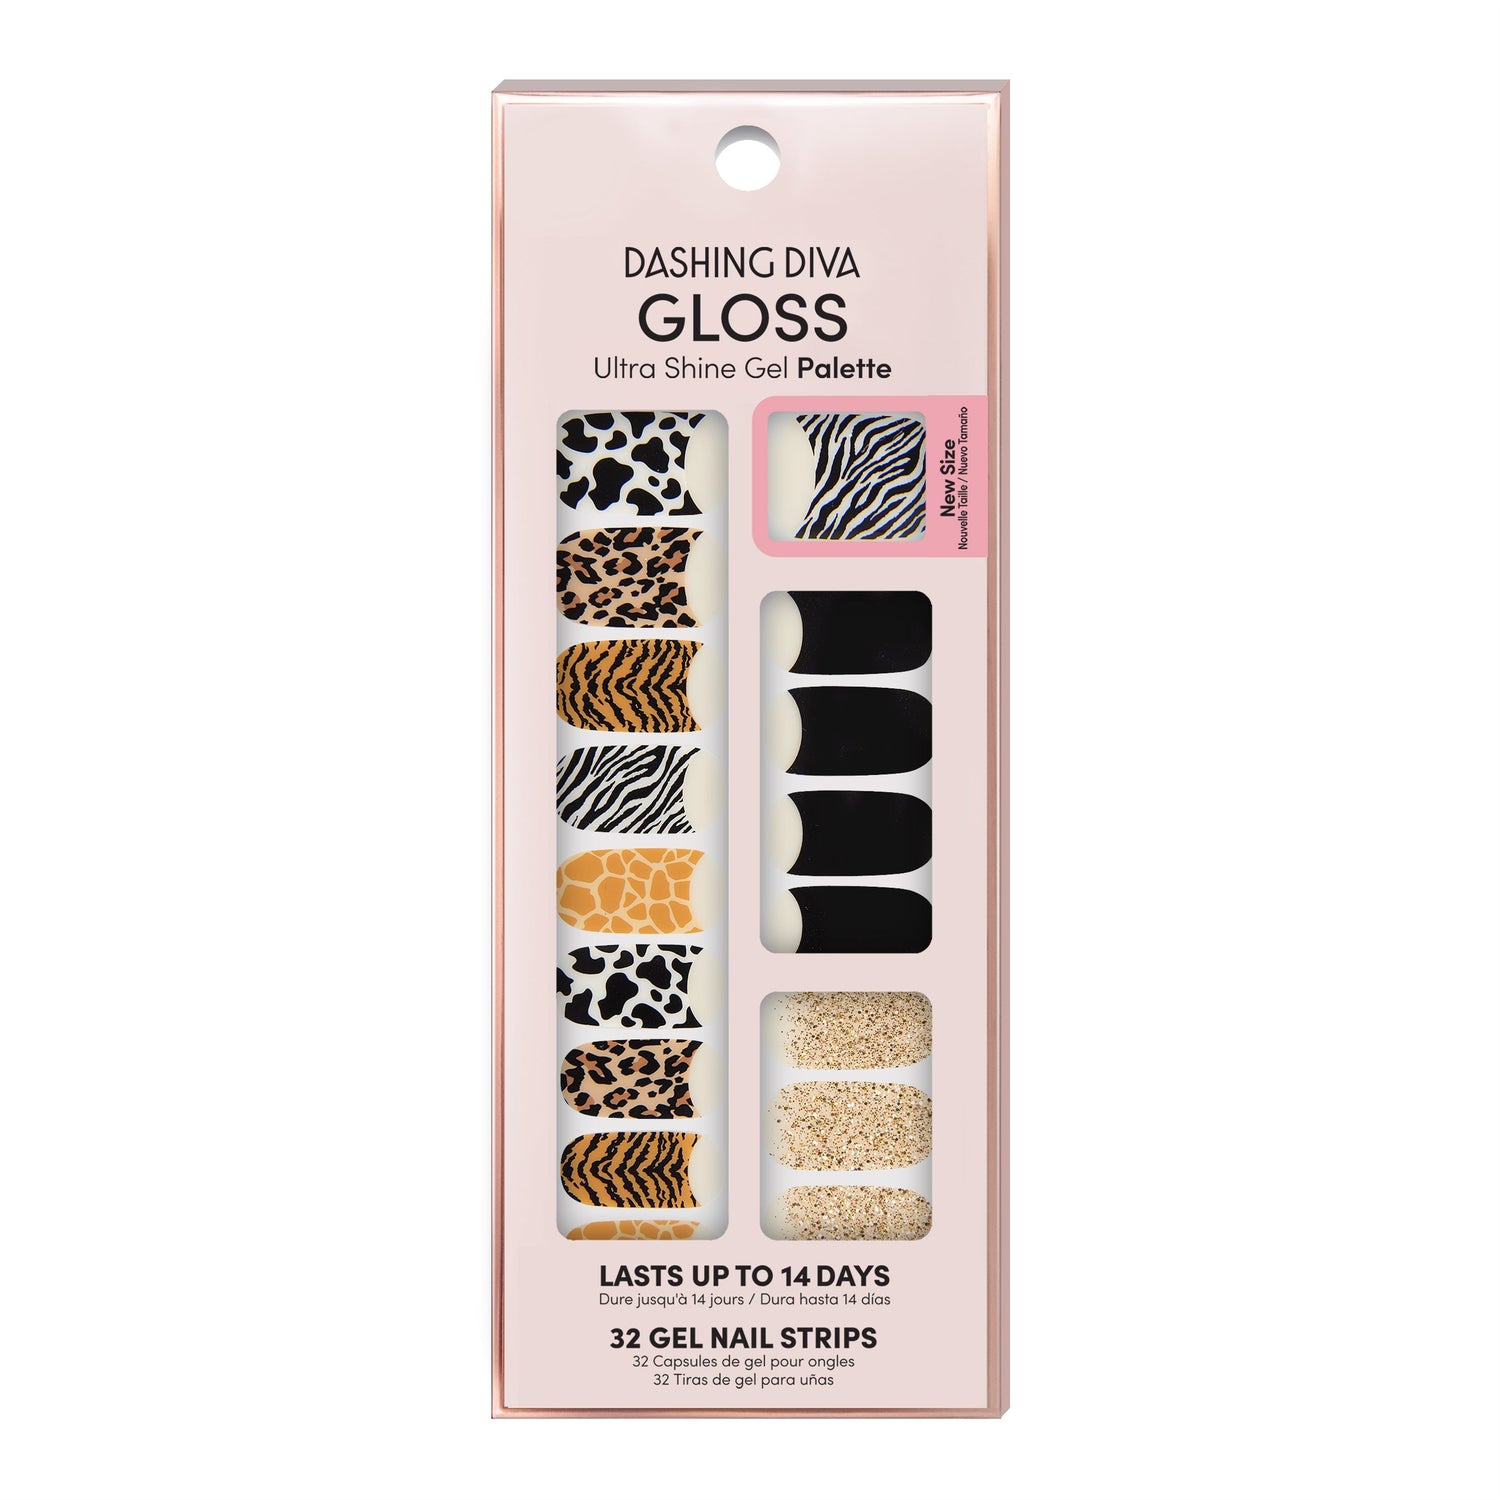 Dashing Diva GLOSS French tip animal print gel nail strips with gold glitter accents.